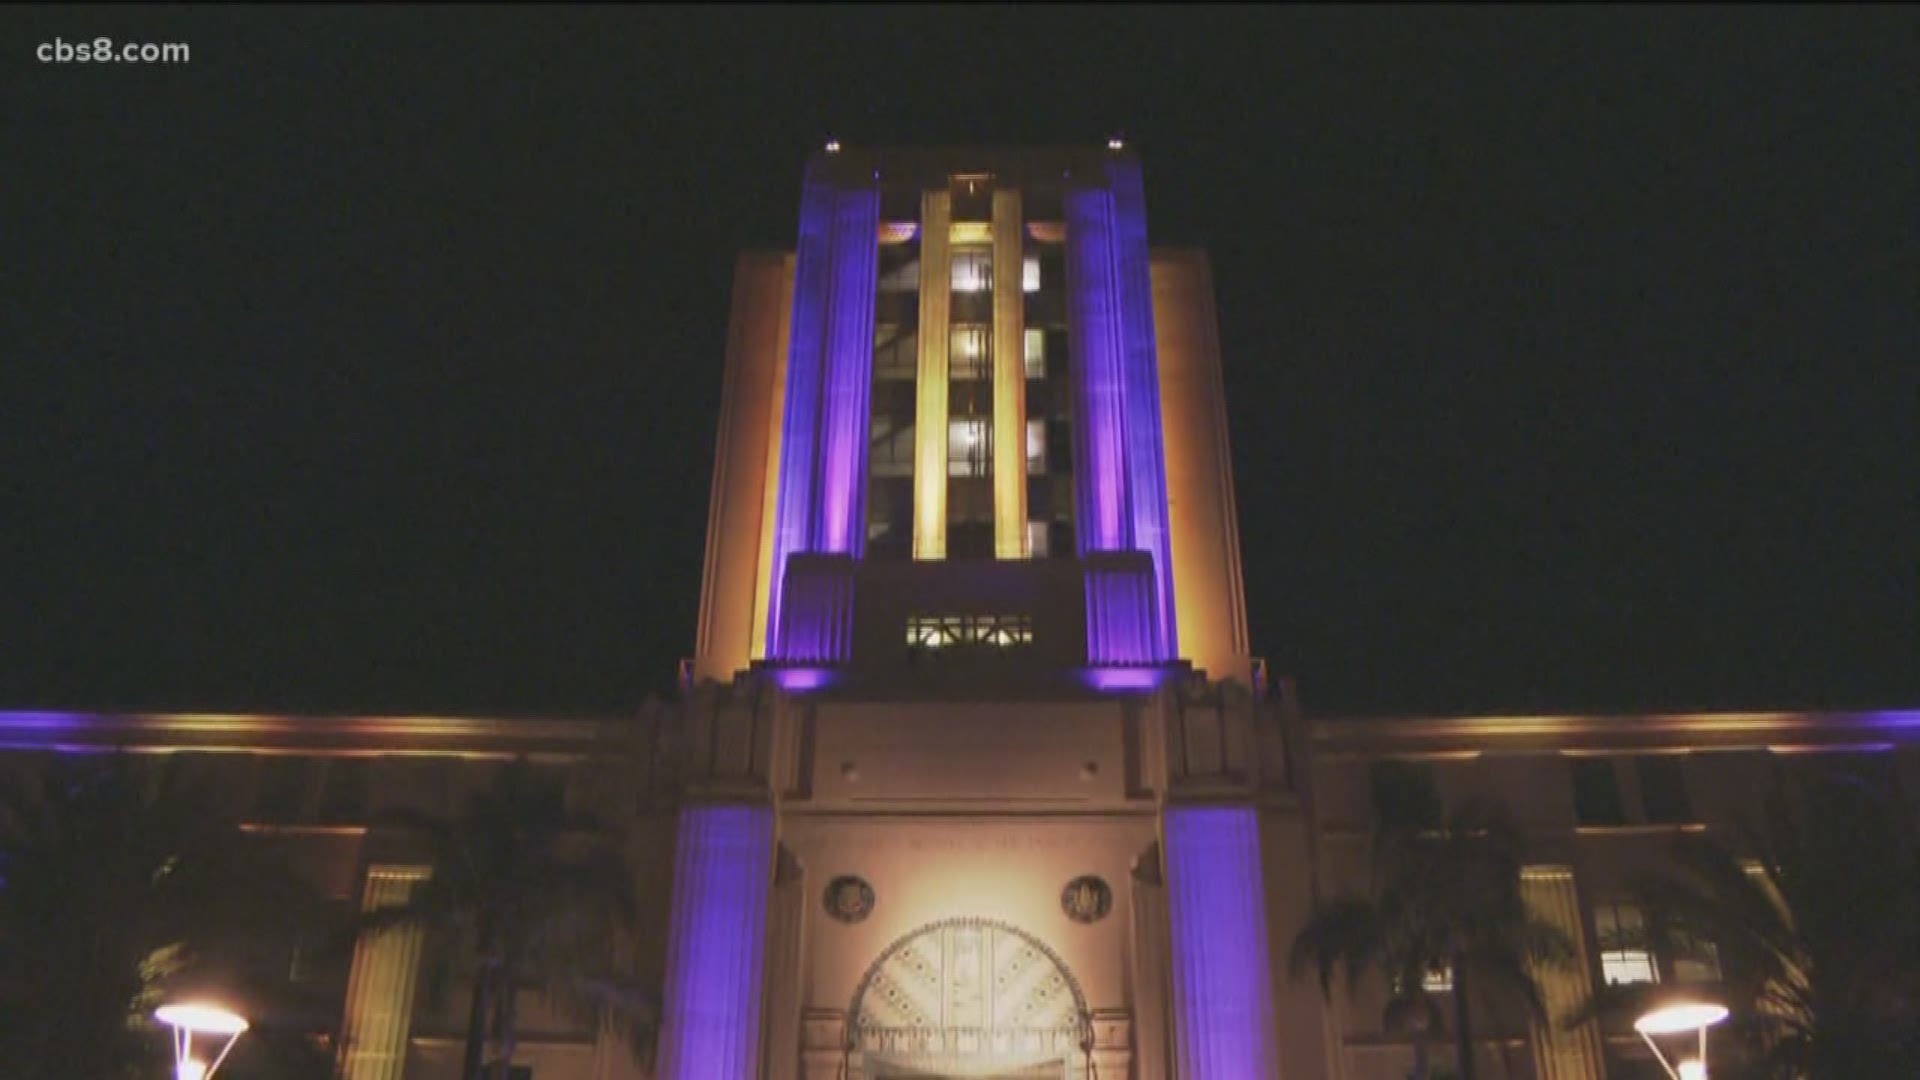 San Diego joined cities across the country in honoring NBA legend Kobe Bryant, his daughter, her teammates and friends.